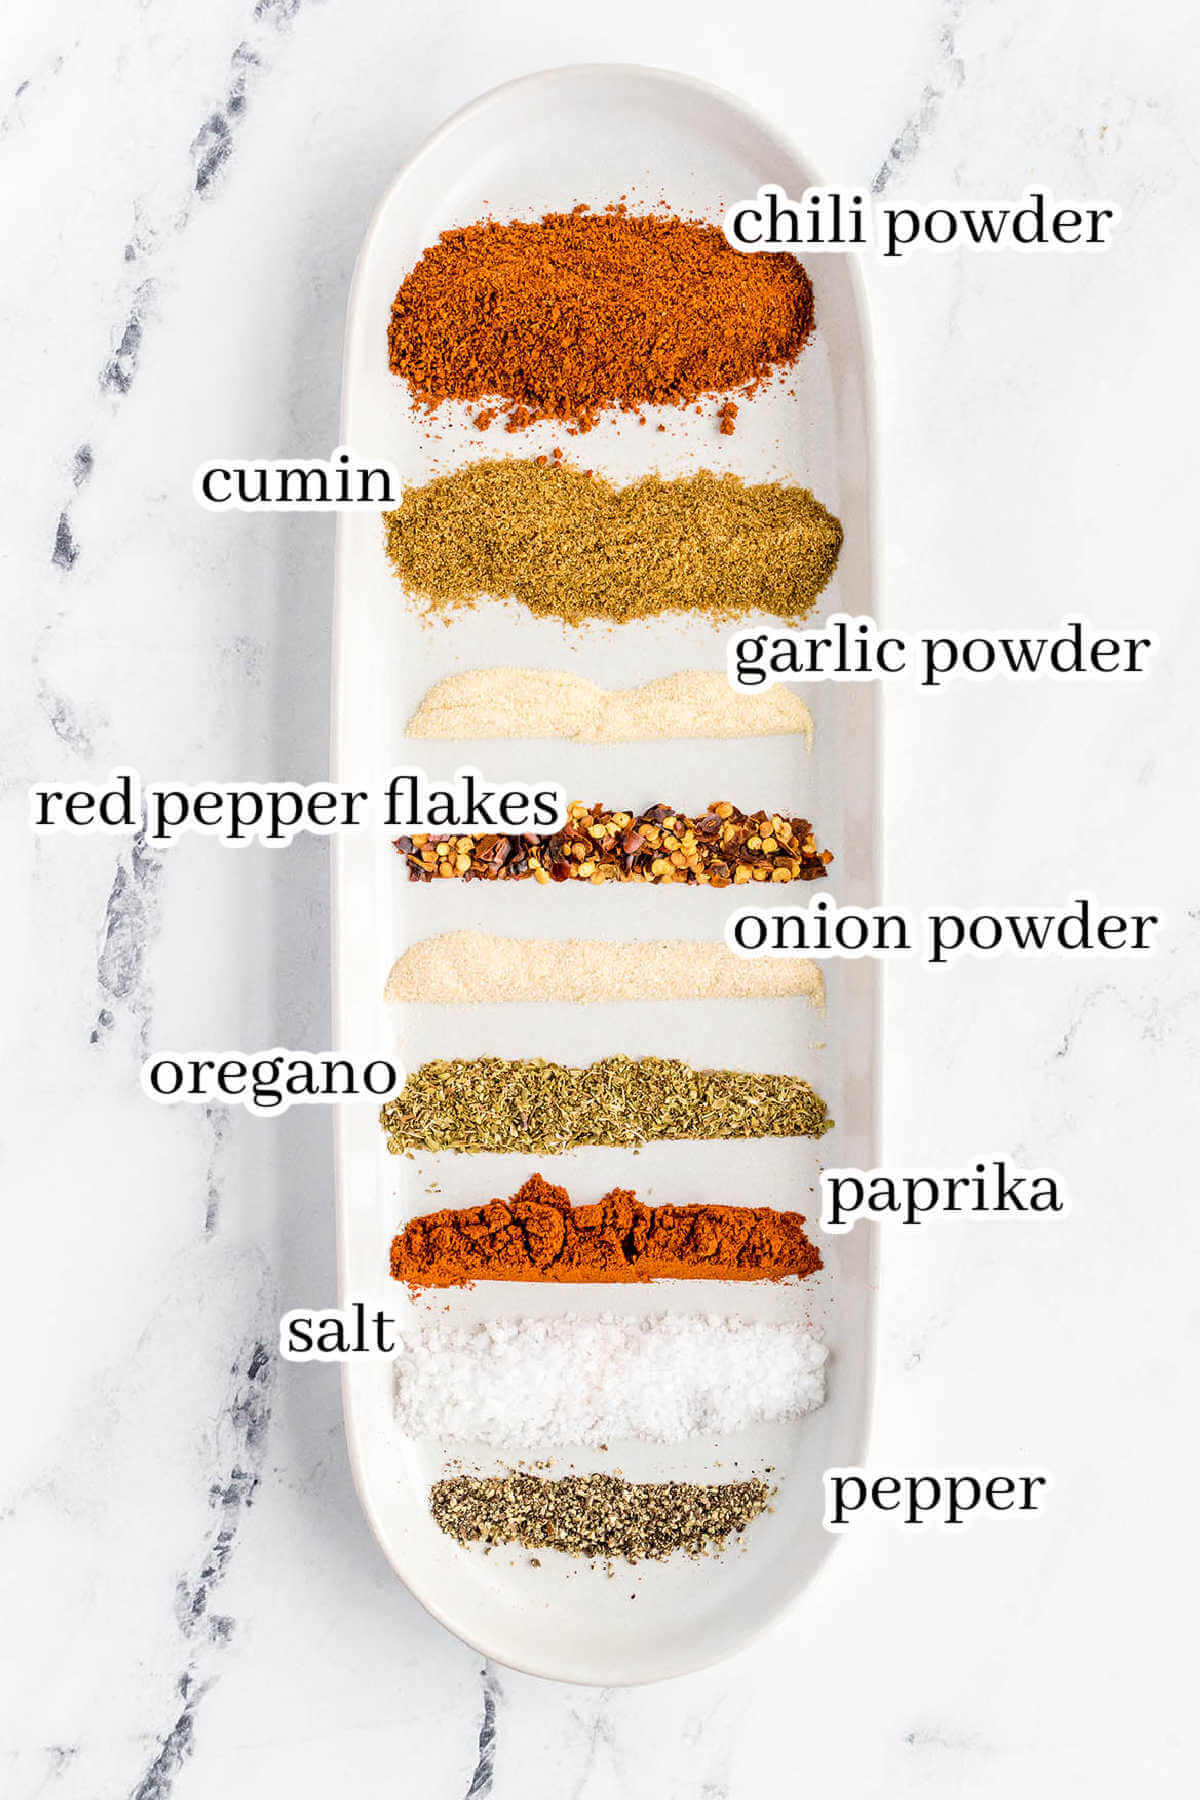 Ingredients to make spice mix, with print overlay.